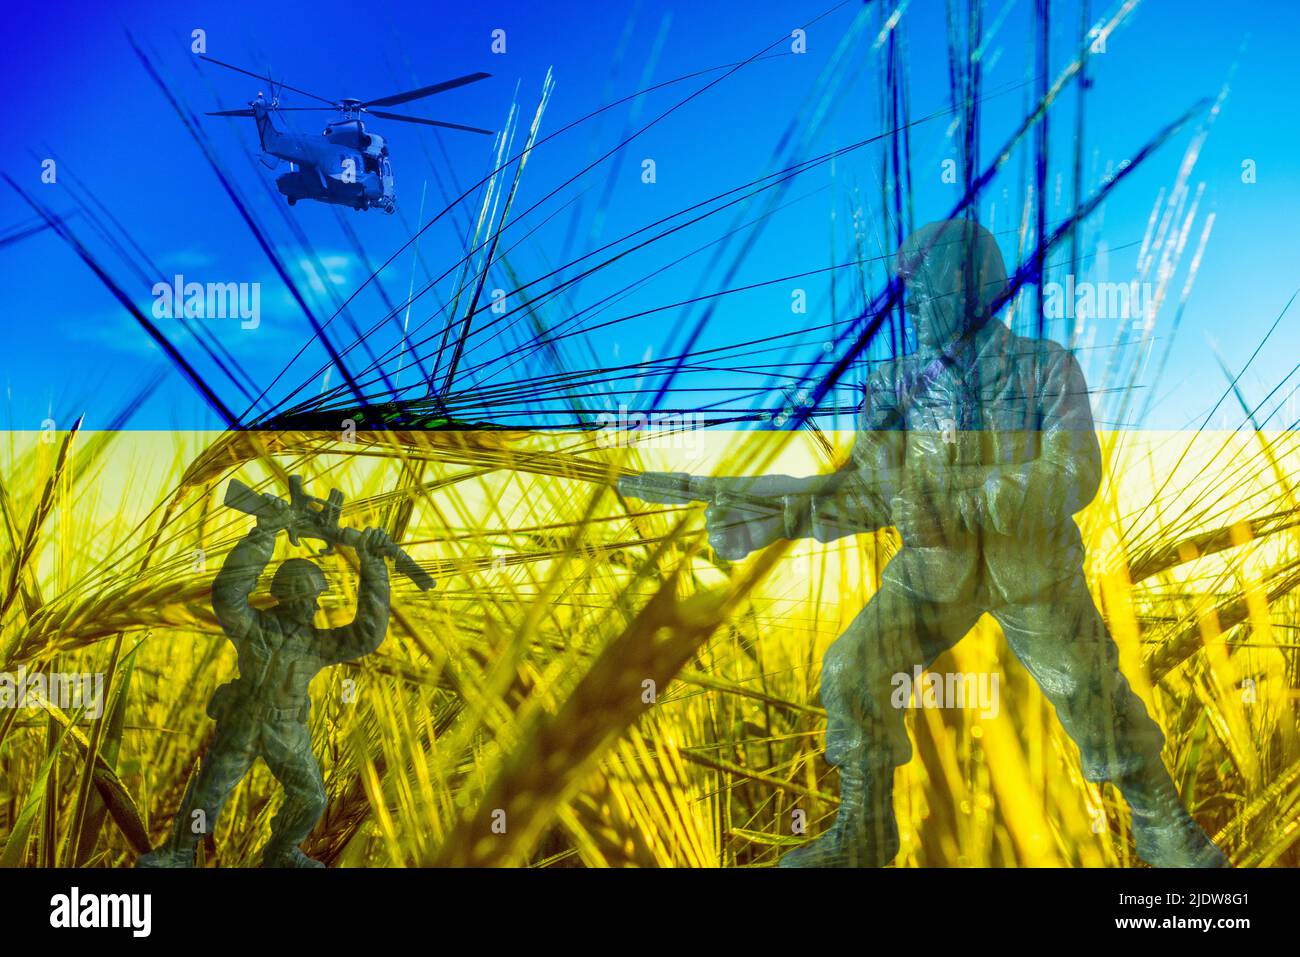 Flag of Ukraine wheat field, soldiers, composite. Concept image: Ukraine Russia conflict, war, wheat, world food shortage, Russian sanctions... Stock Photo